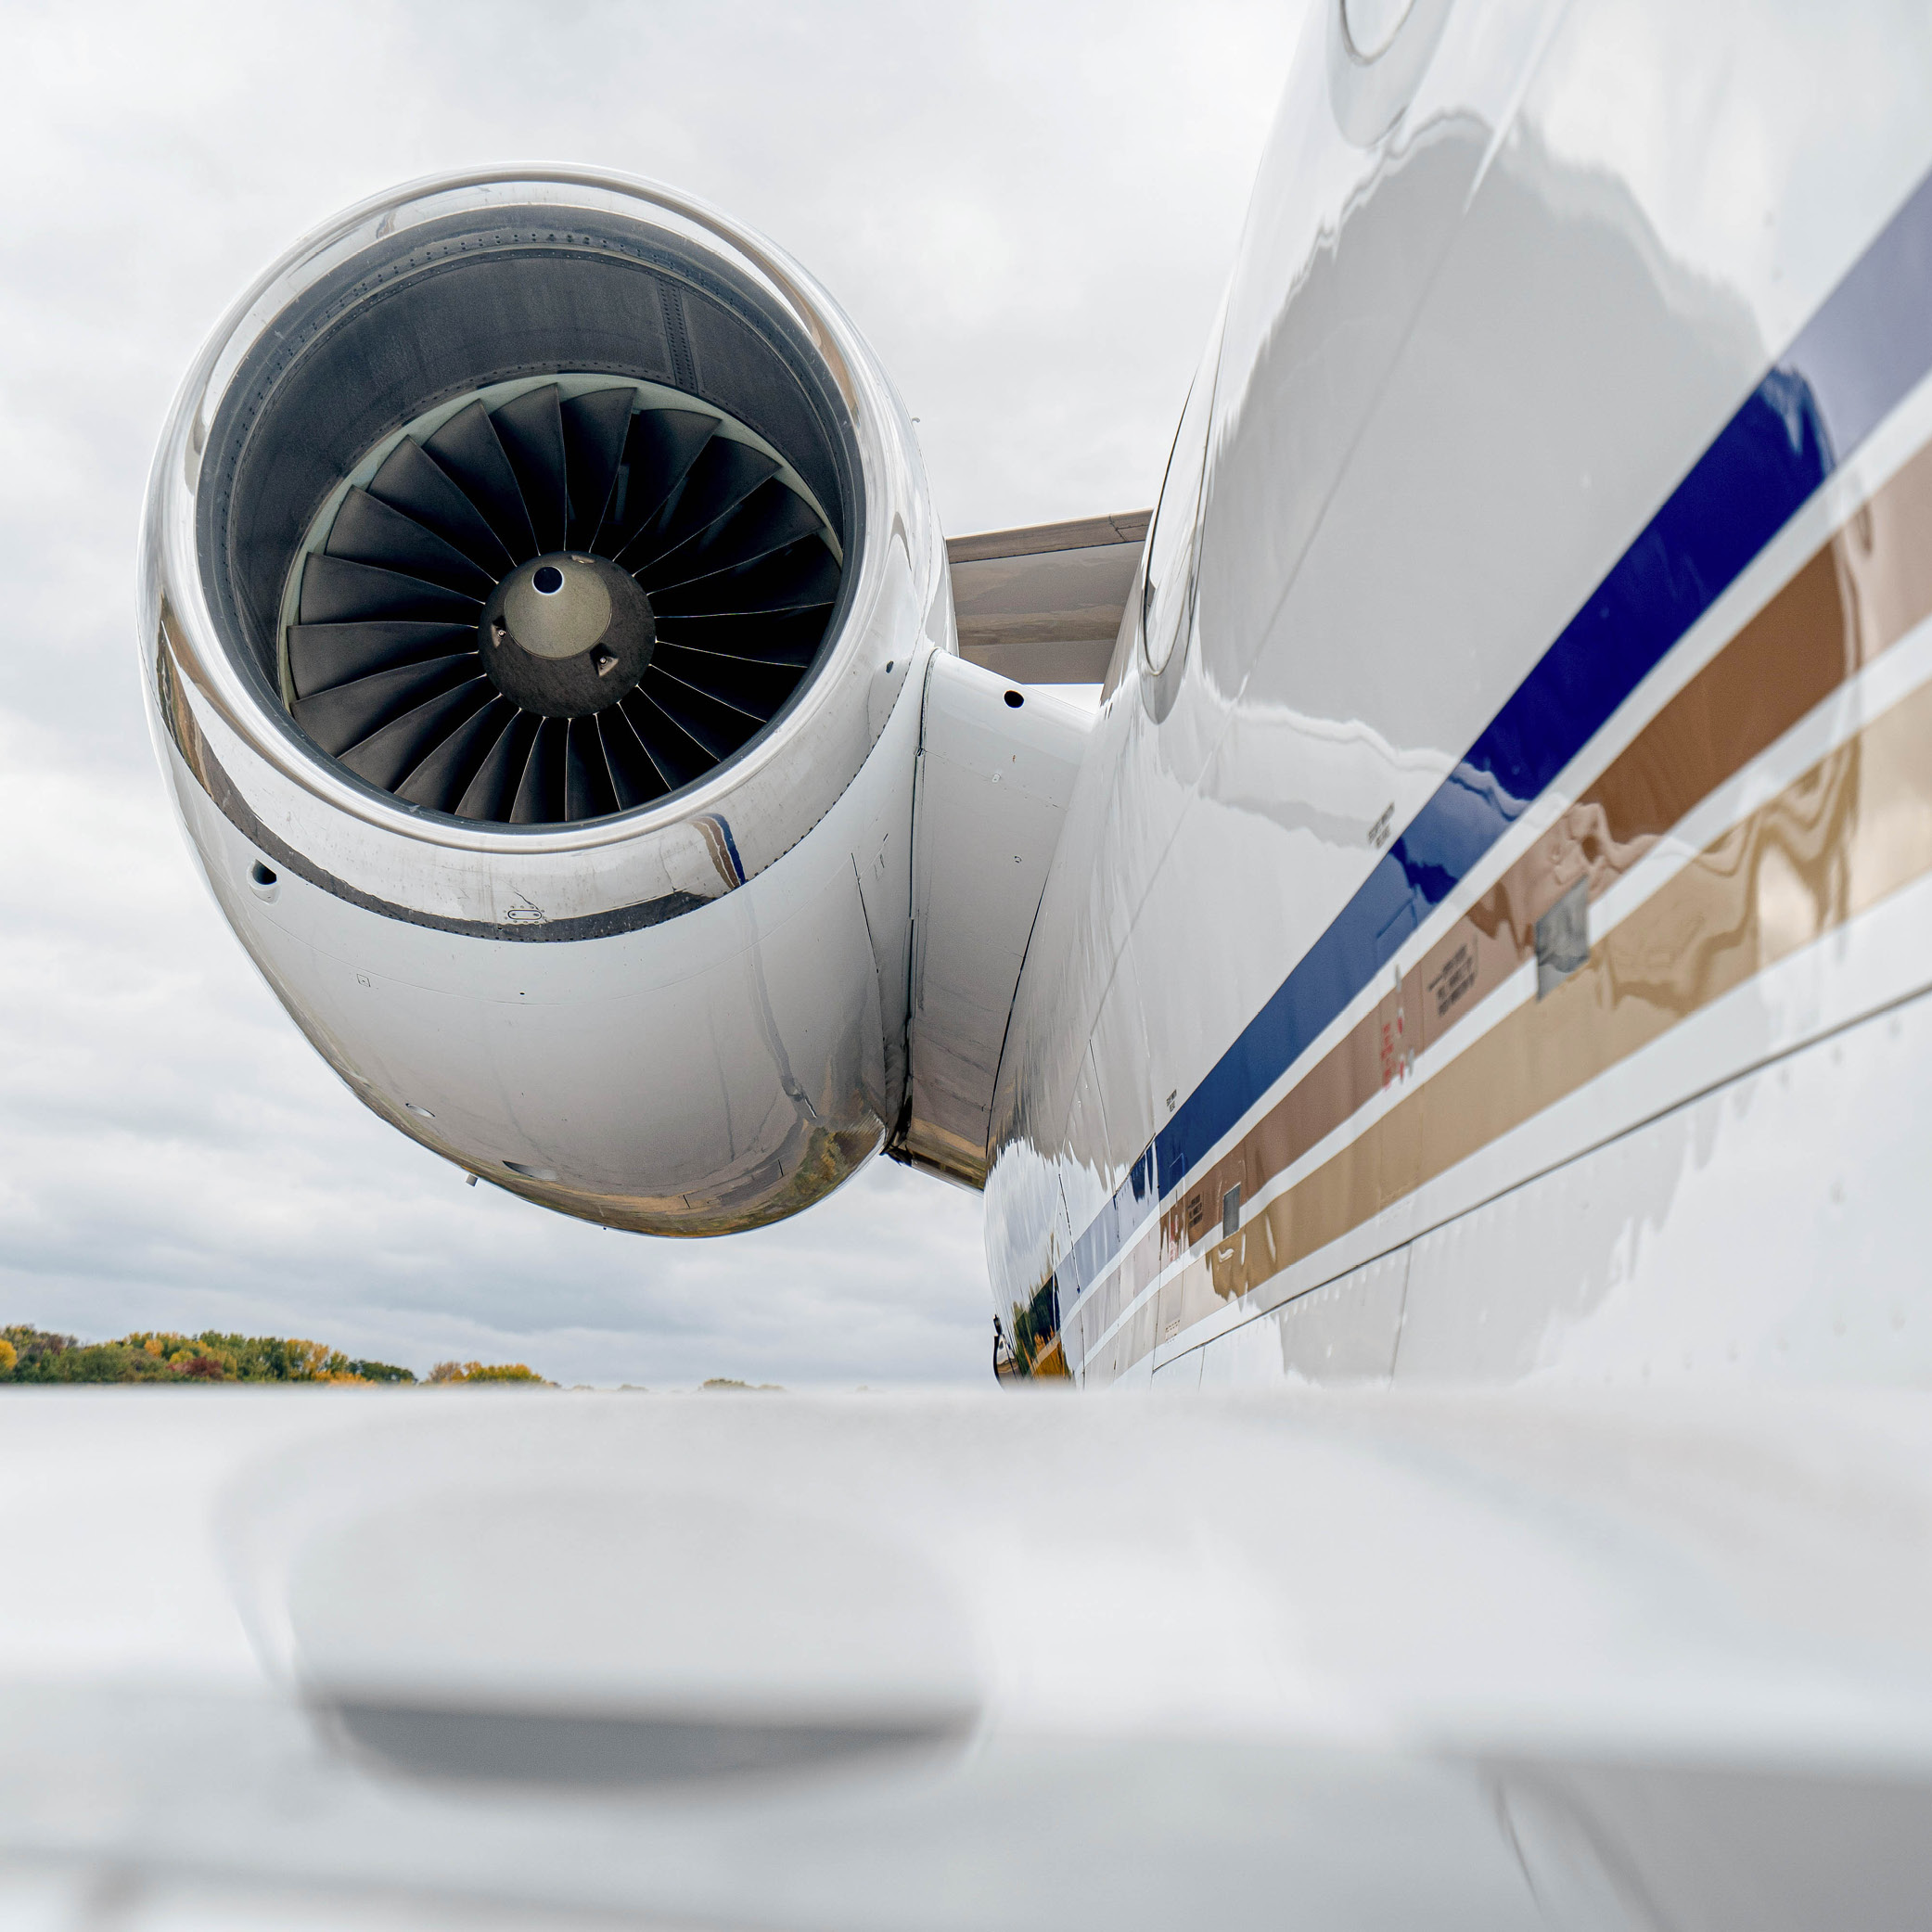 Volato takes flight! Private jet giant to go public with SPAC merger plans.